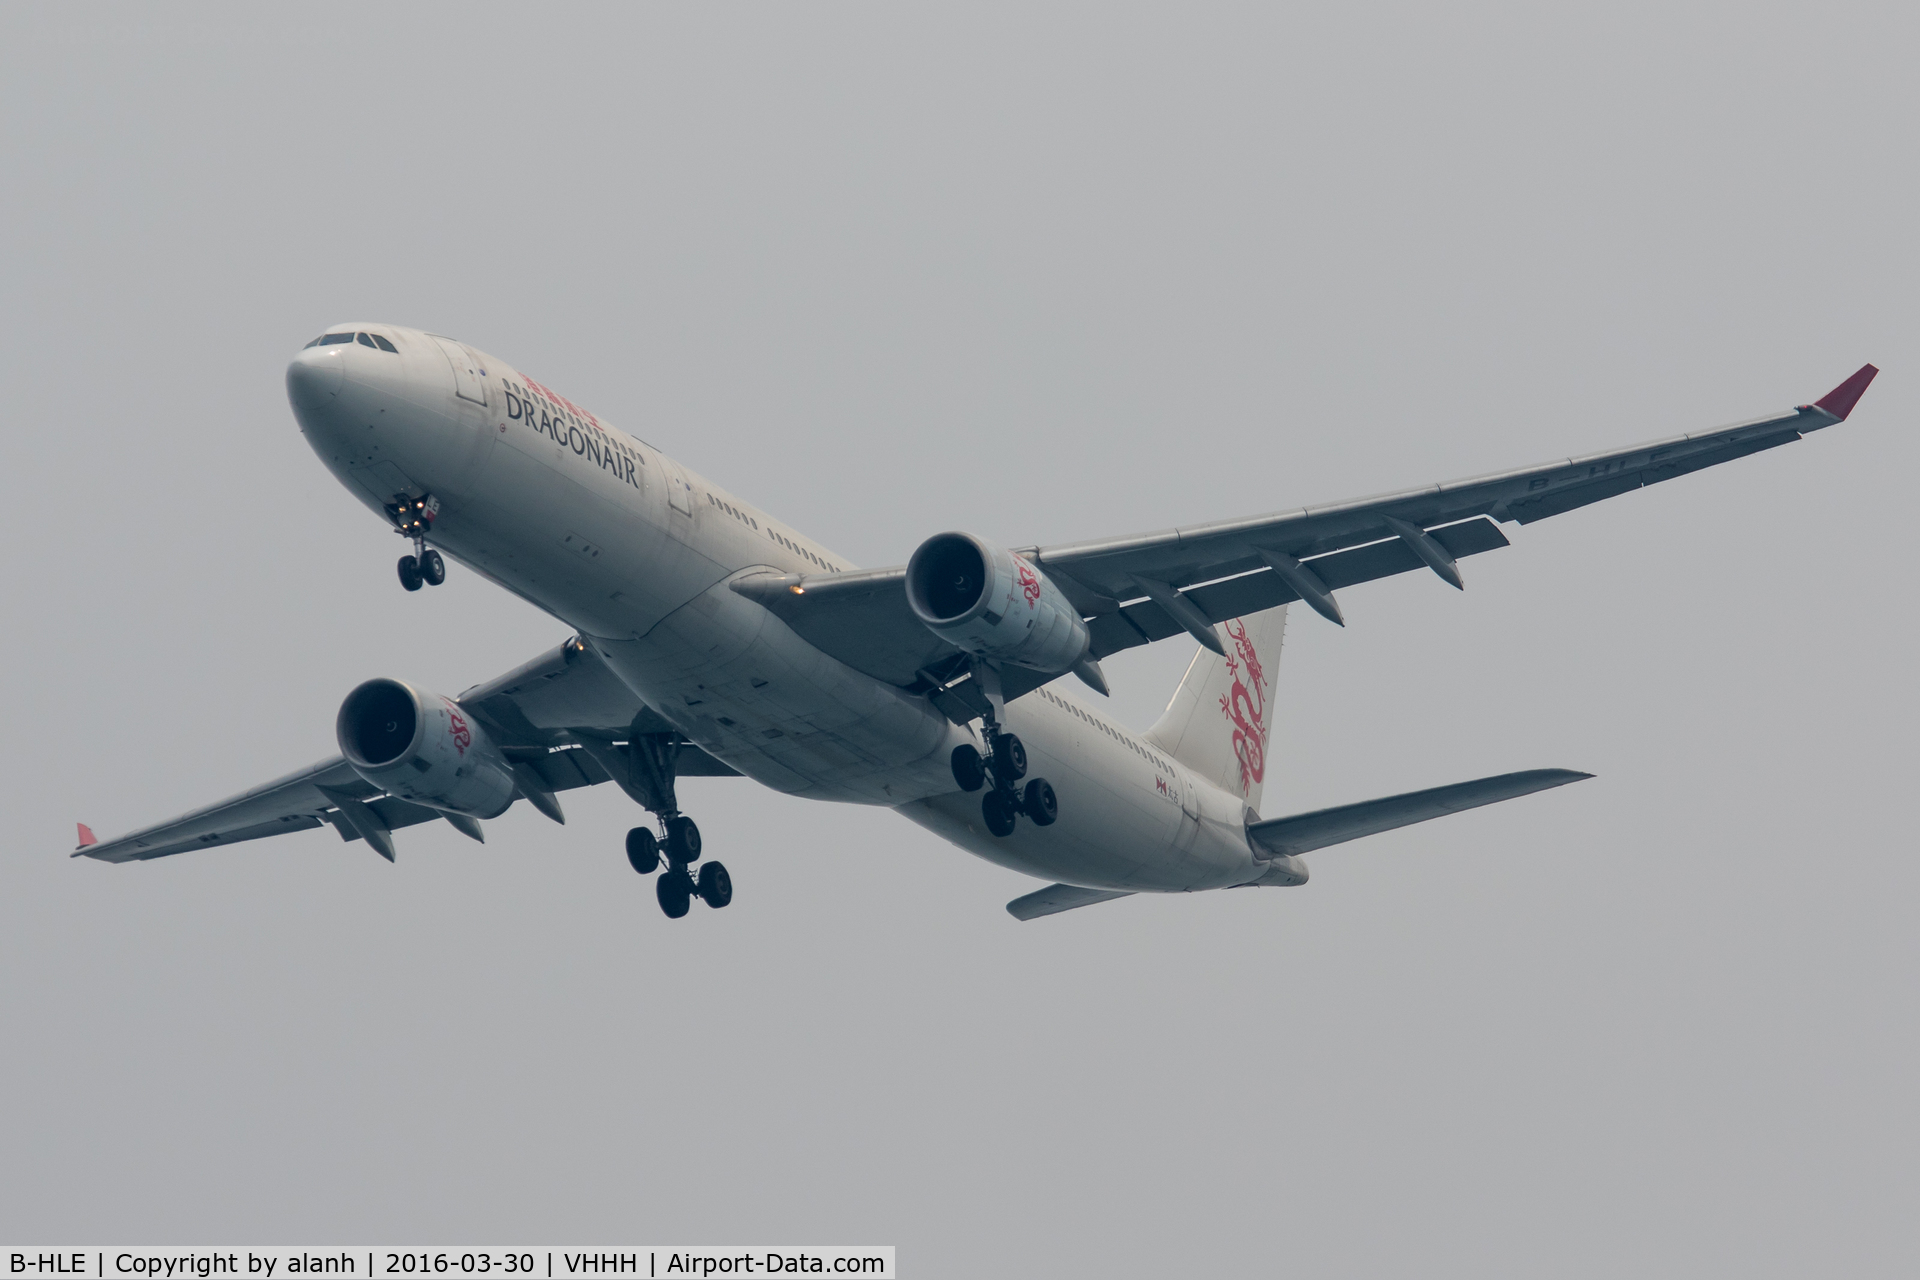 B-HLE, 1995 Airbus A330-342 C/N 109, On finals for Hong Kong, inbound from Xi'an Xianyang Int'l